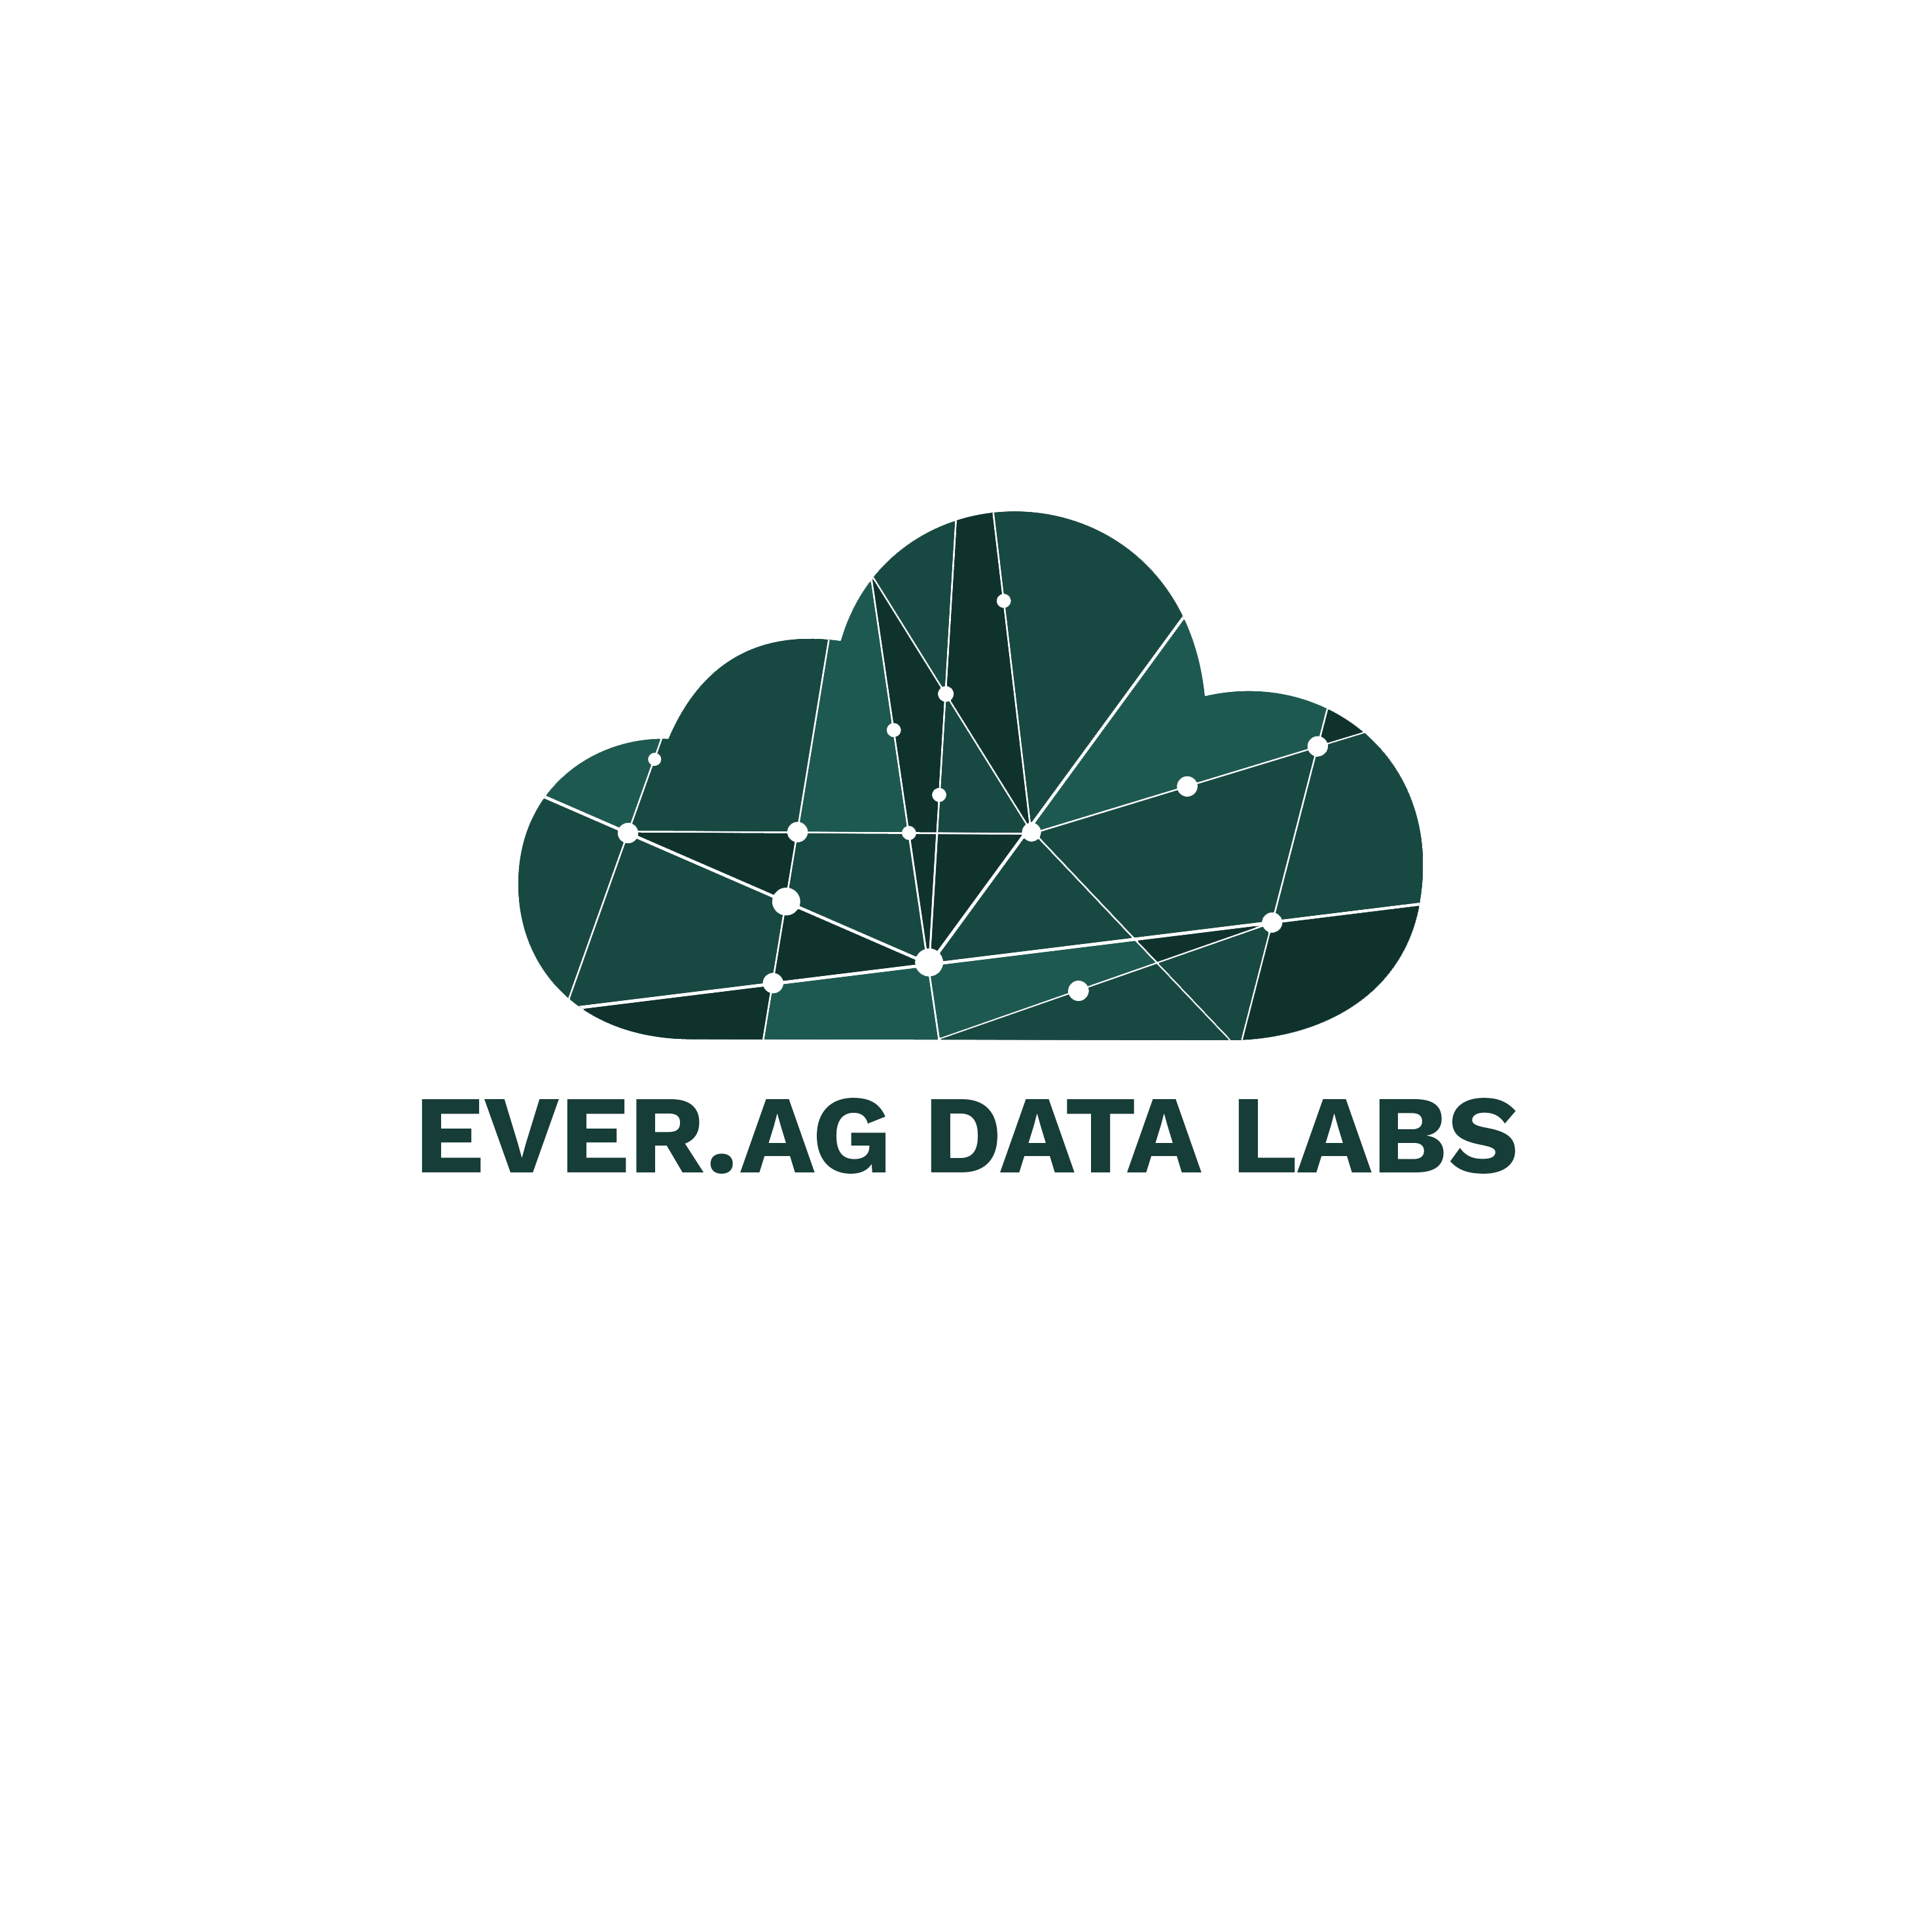 Ever.Ag Unveils Ever.Ag Data Labs: A New Era of AI-Based Data Science in Agriculture, Food, and Beverage Production